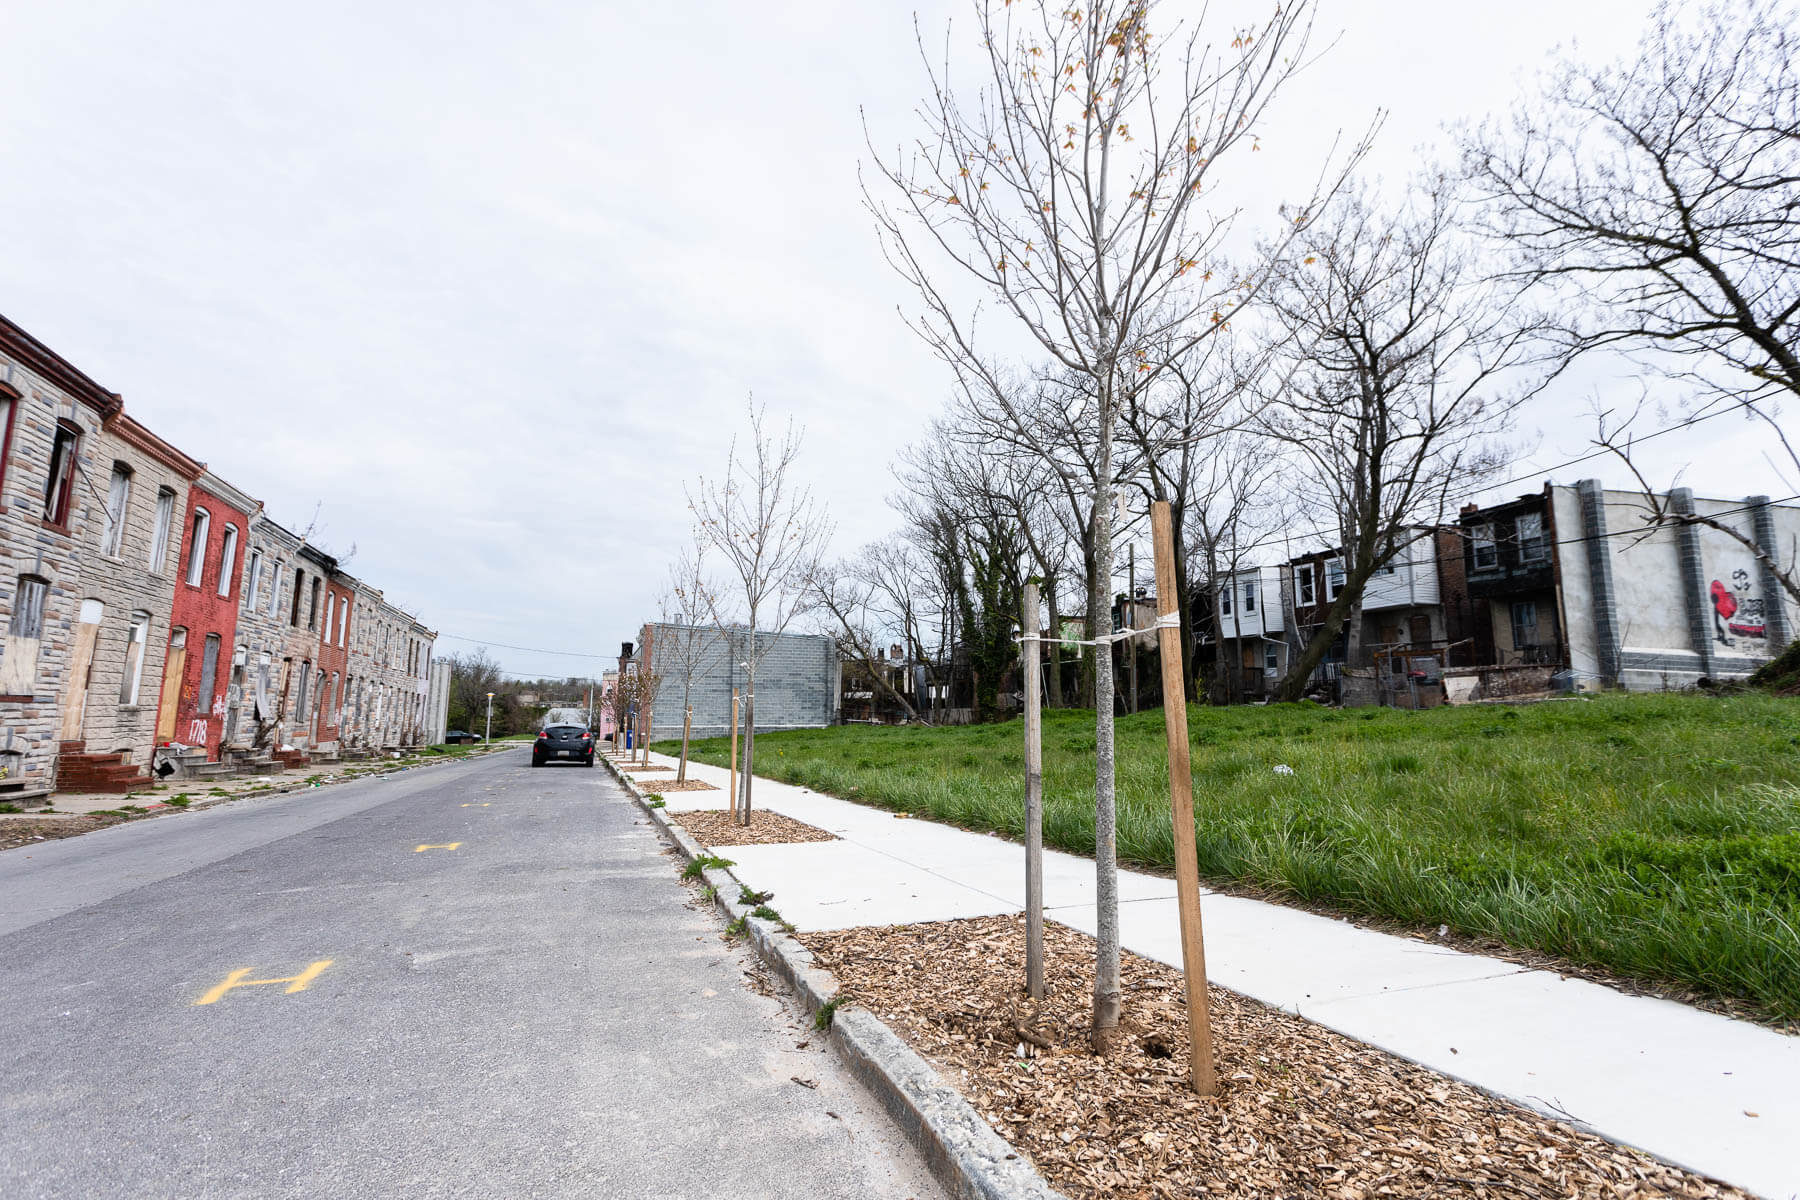 New trees planted in a dense urban area.